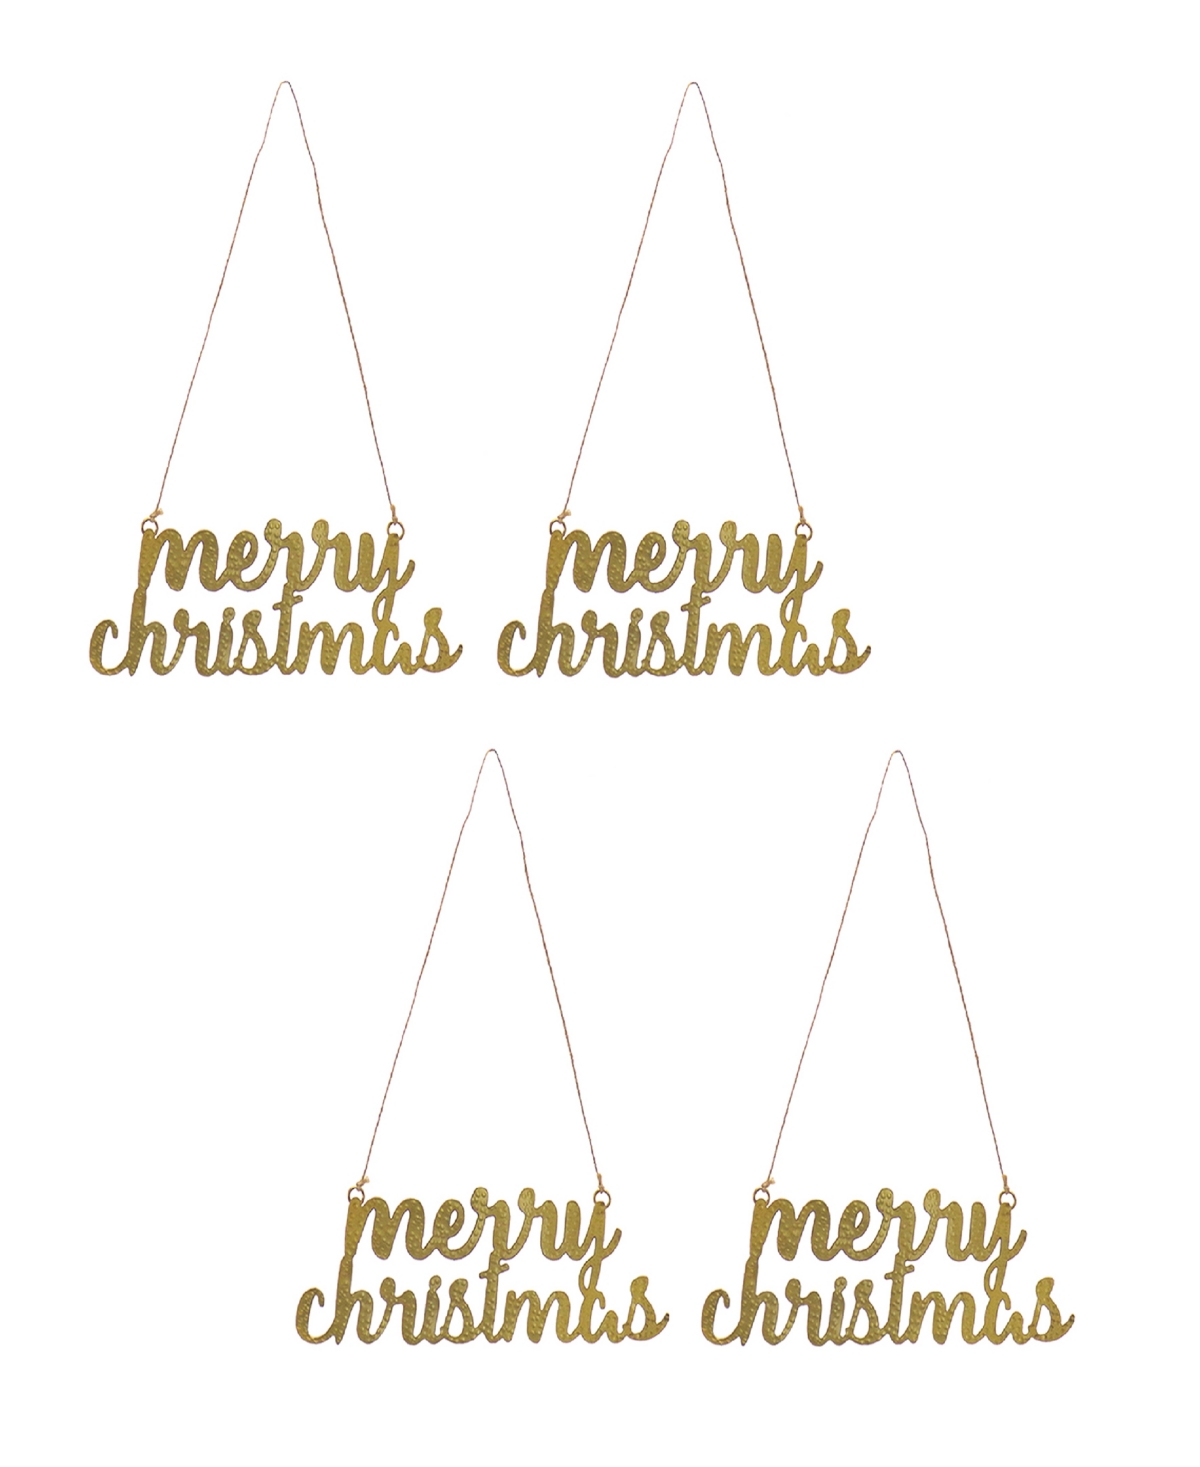 9" Hgtv Home Collection Merry Christmas Metal Ornament Set - Gold